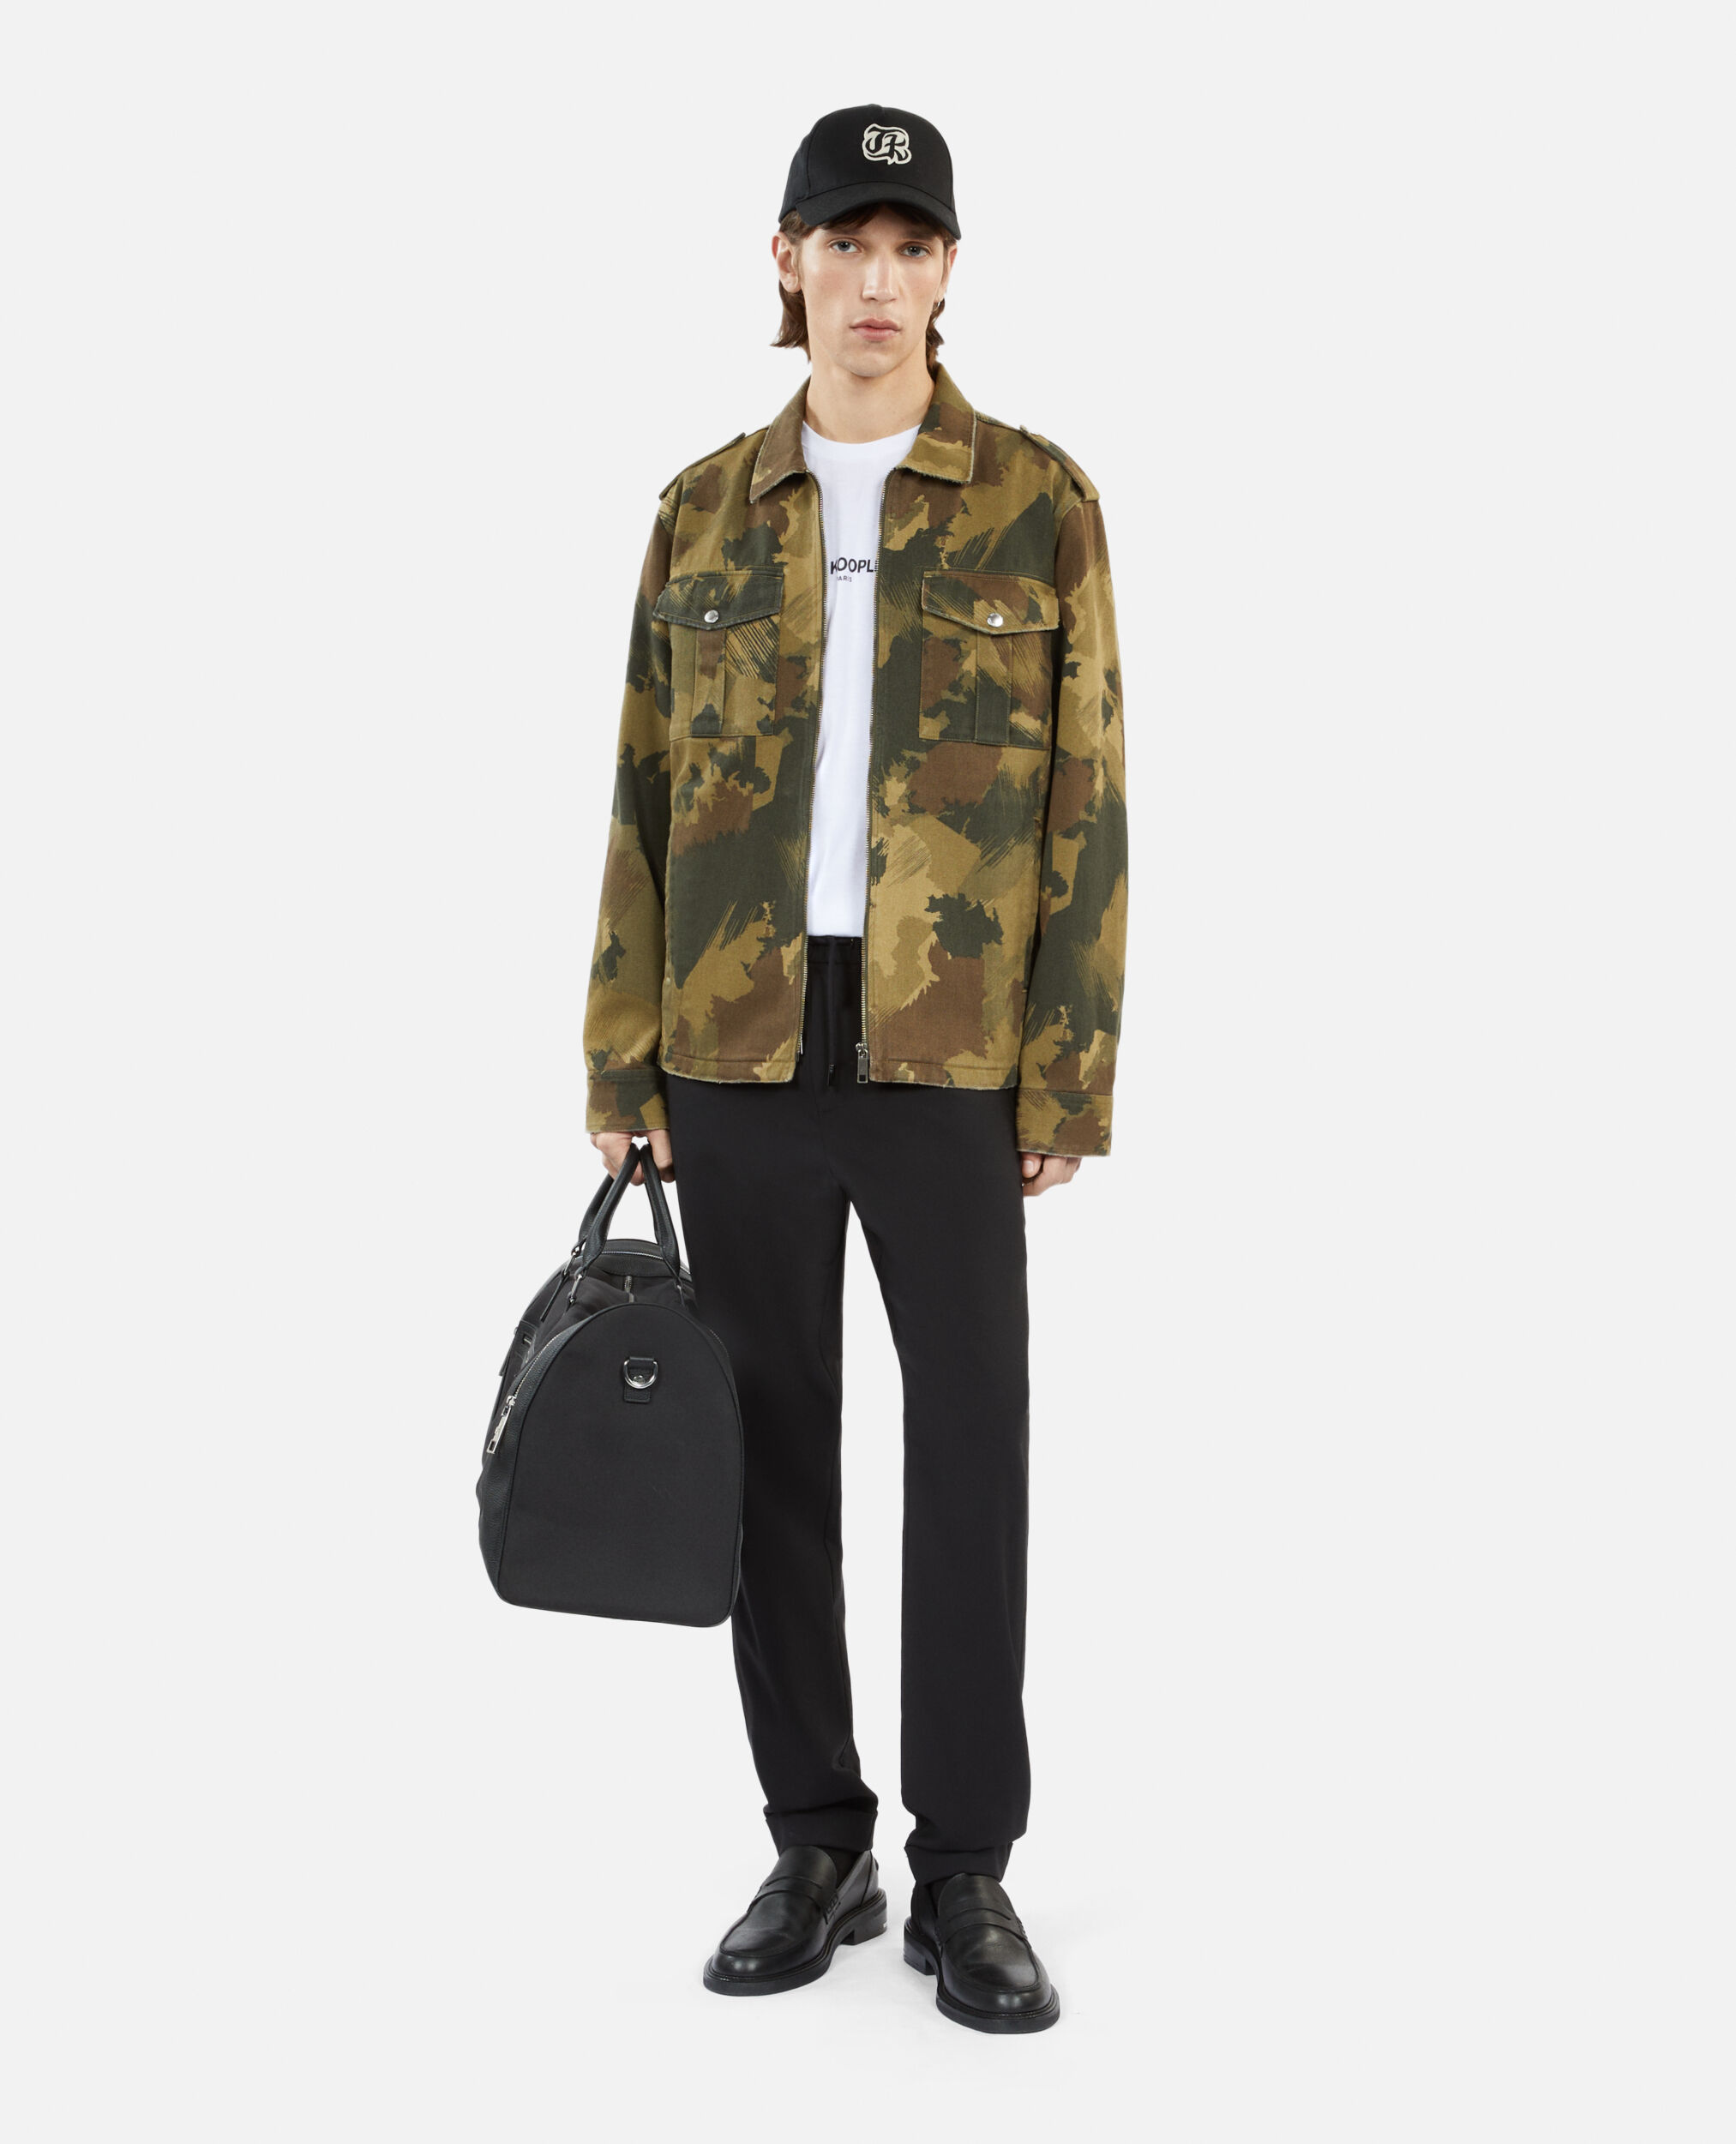 Blouson in Camouflage, CAMOUFLAGE, hi-res image number null